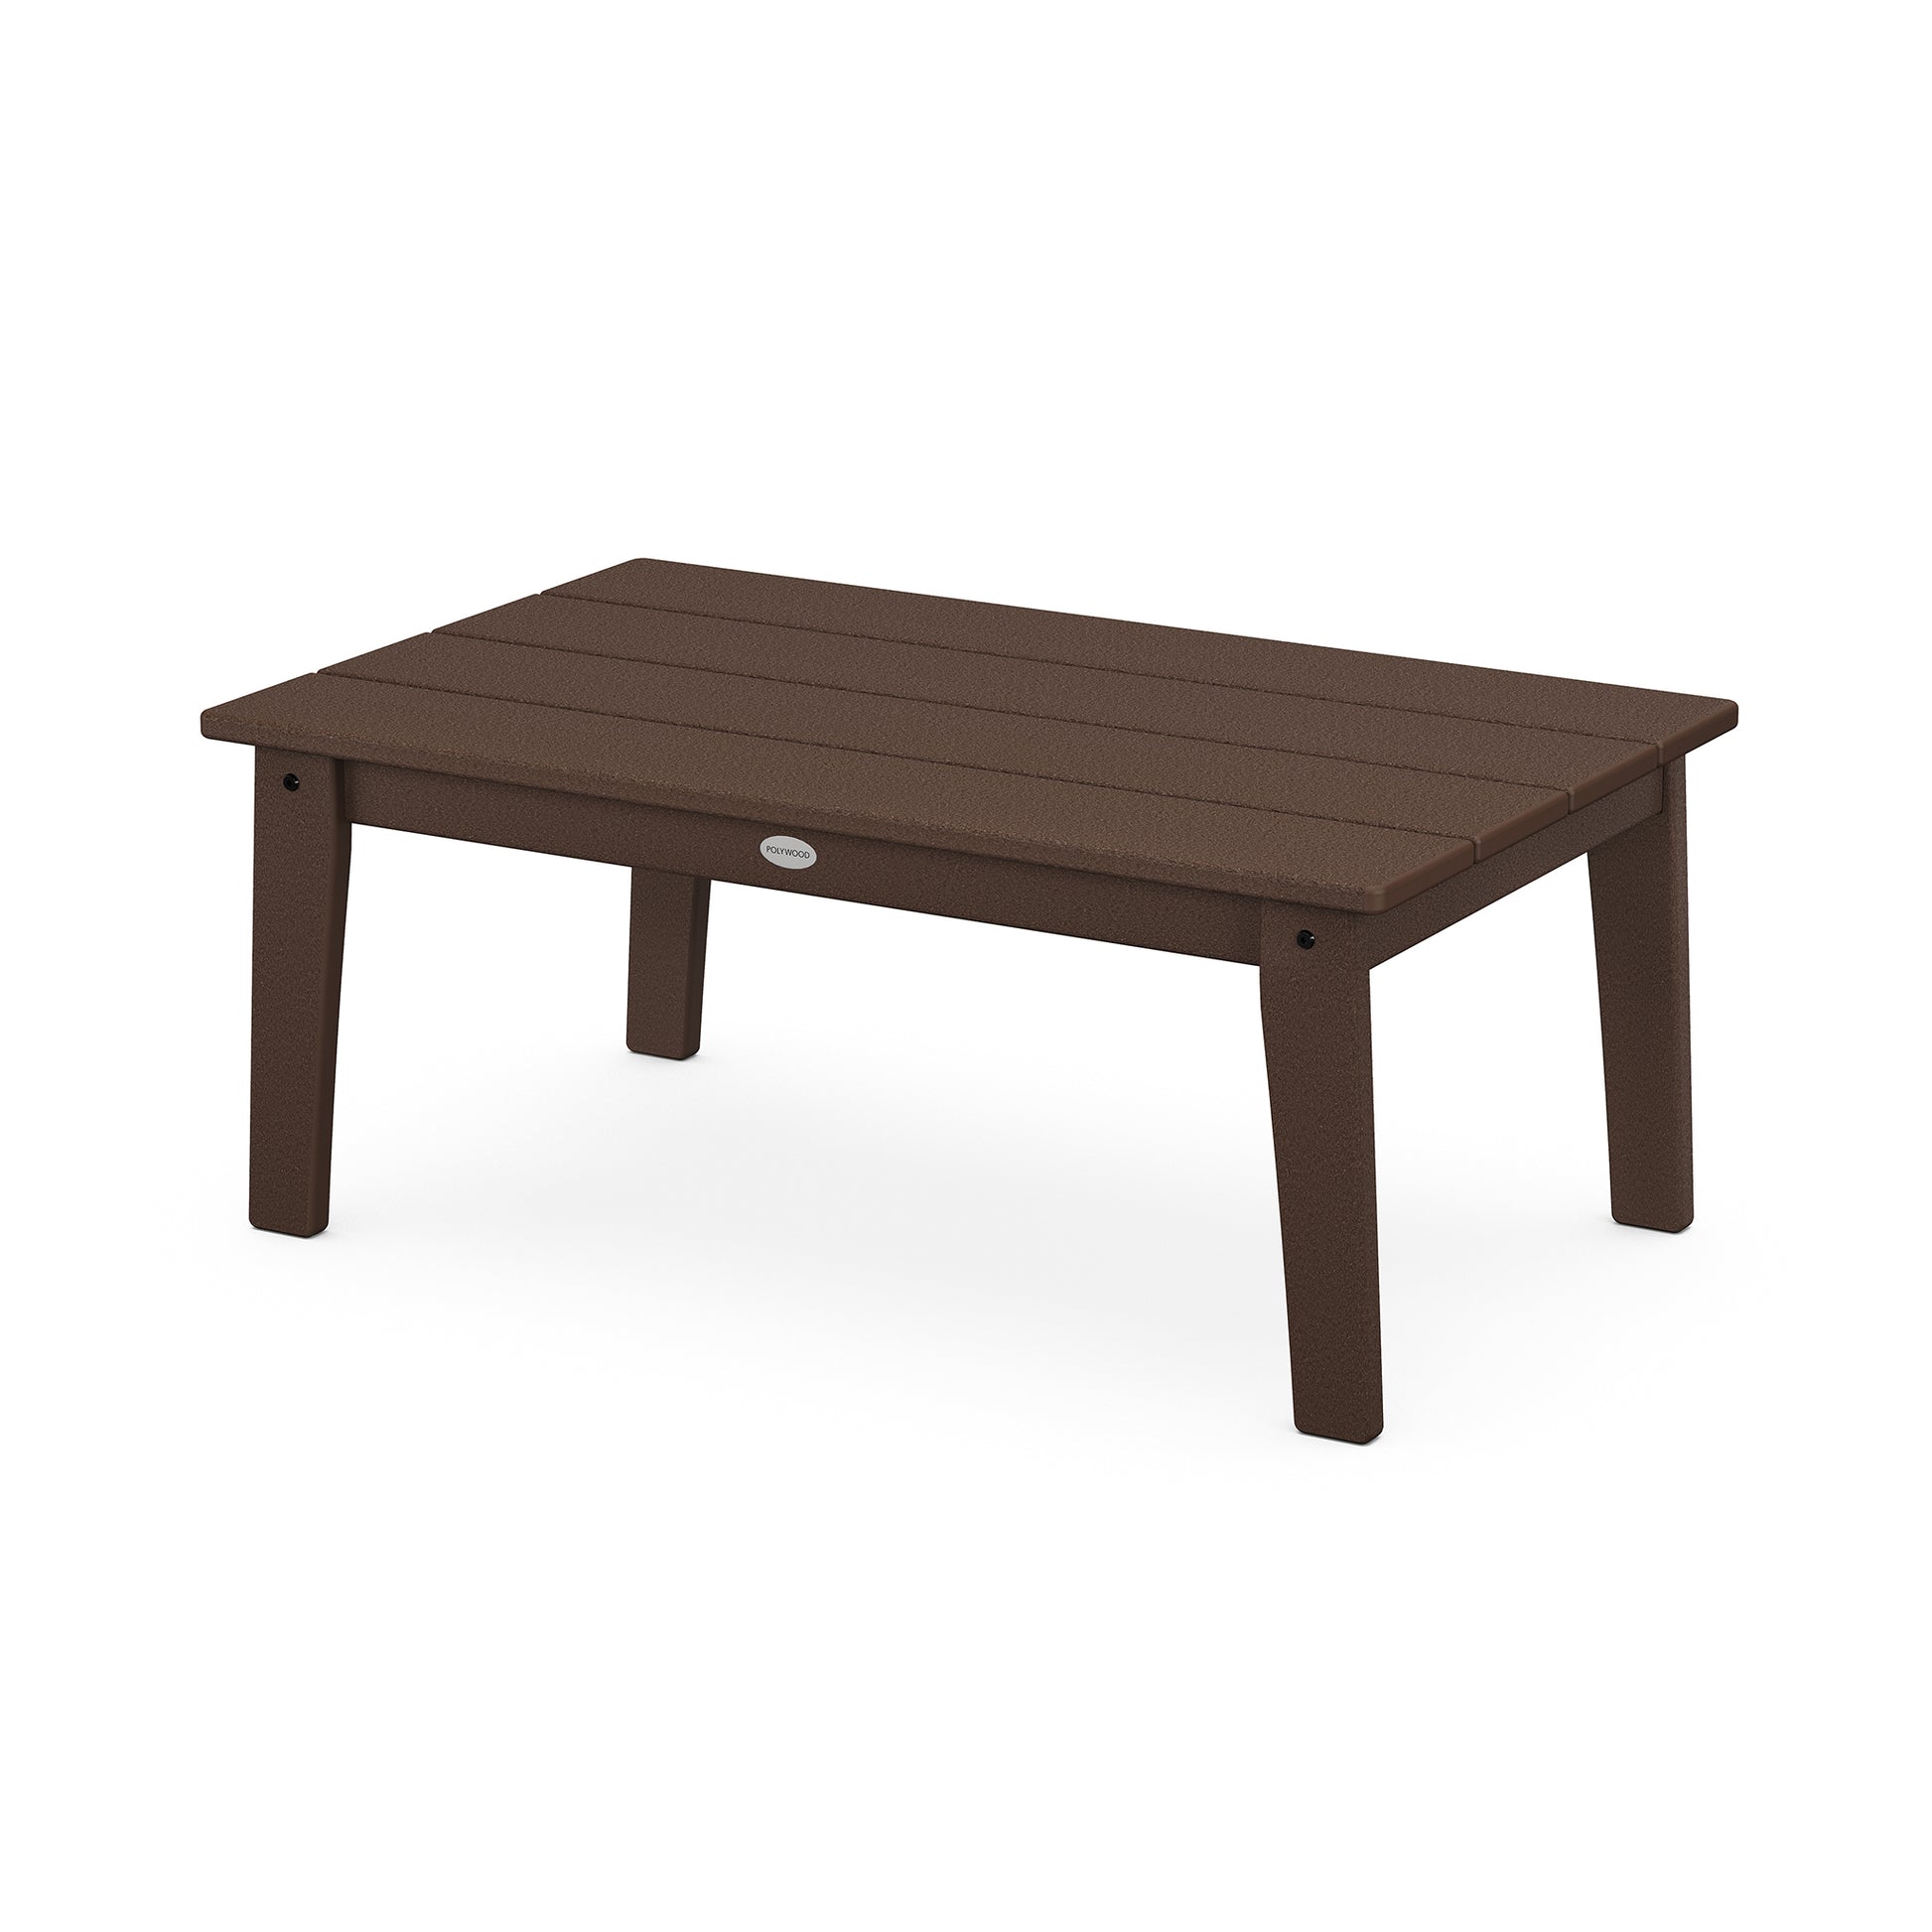 A rectangular, dark brown POLYWOOD Lakeside 23" x 36" coffee table with a slatted top and four legs, displayed against a white background.